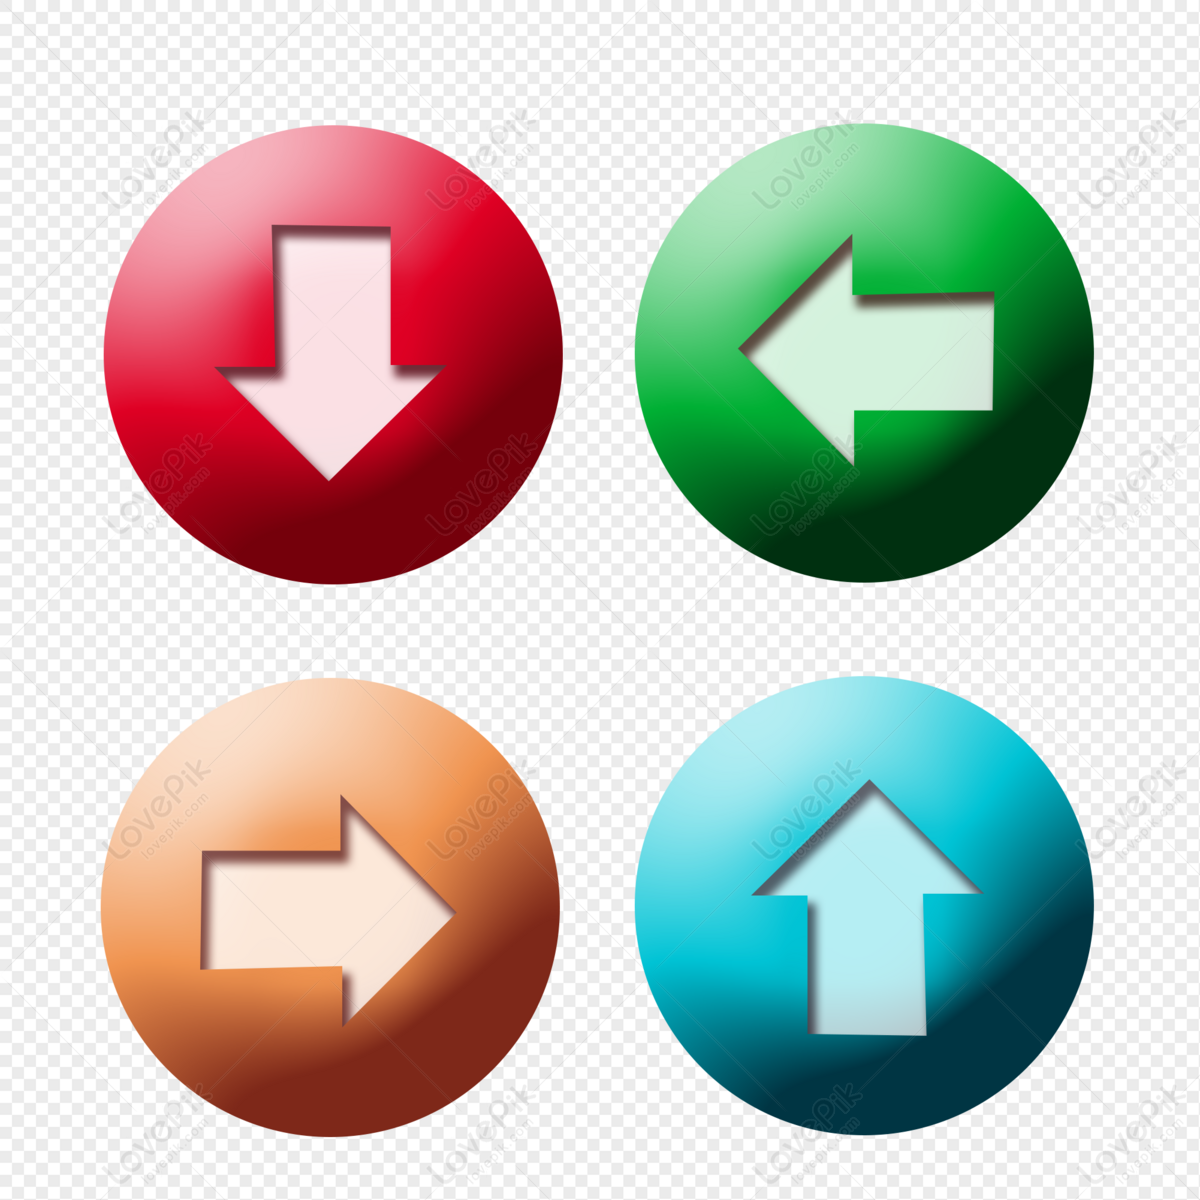 Arrow Buttons Pointing Up Down Left And Right Png Image And Psd File For Free Download Lovepik